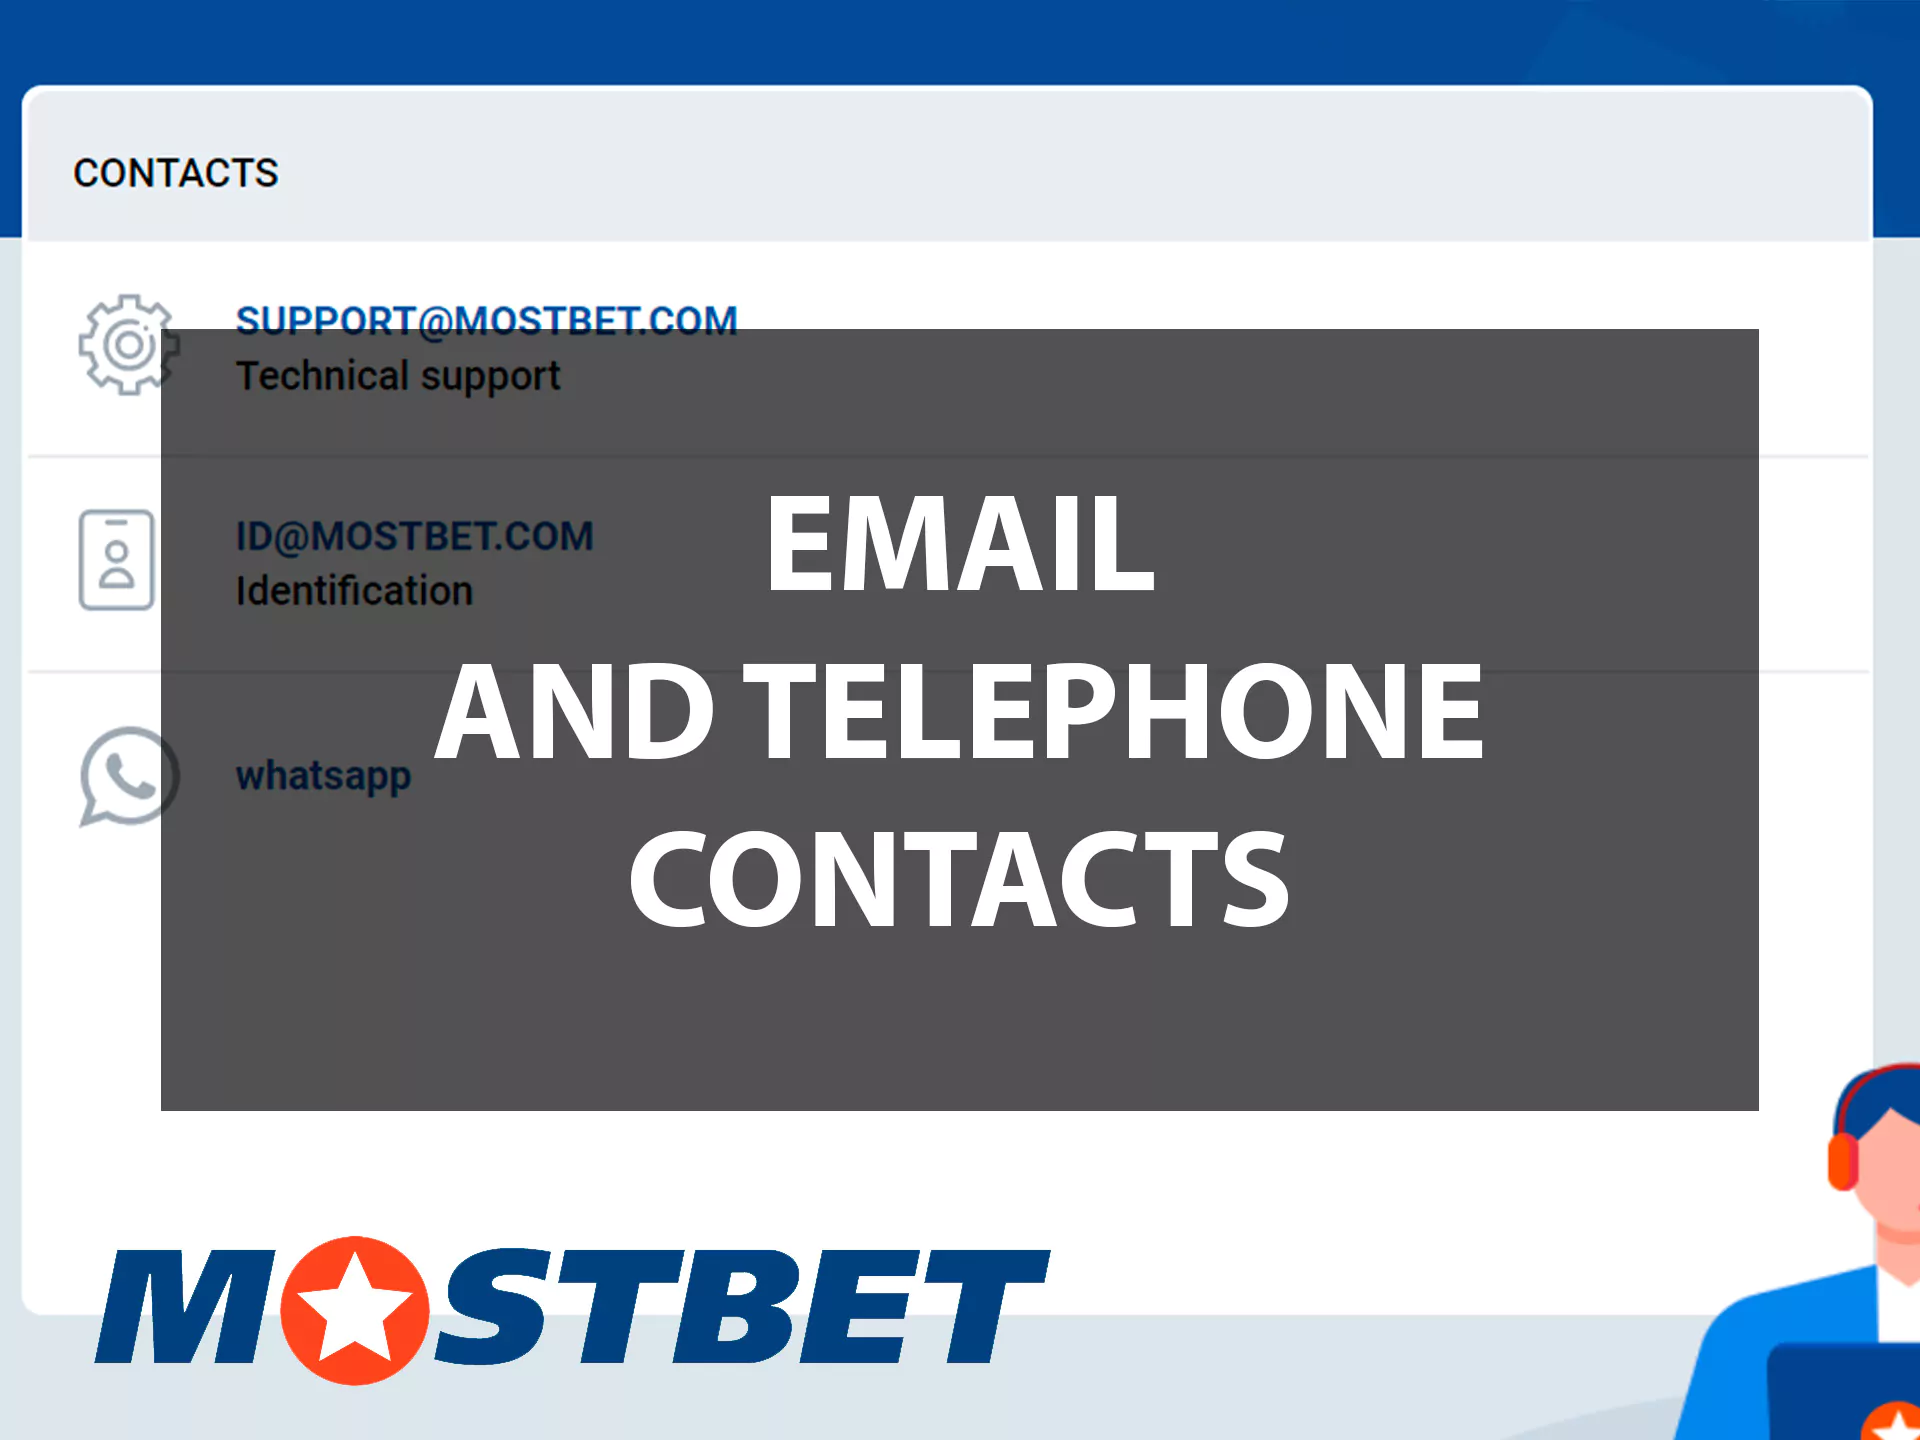 These are the ways to contact hte Mostbet support team.